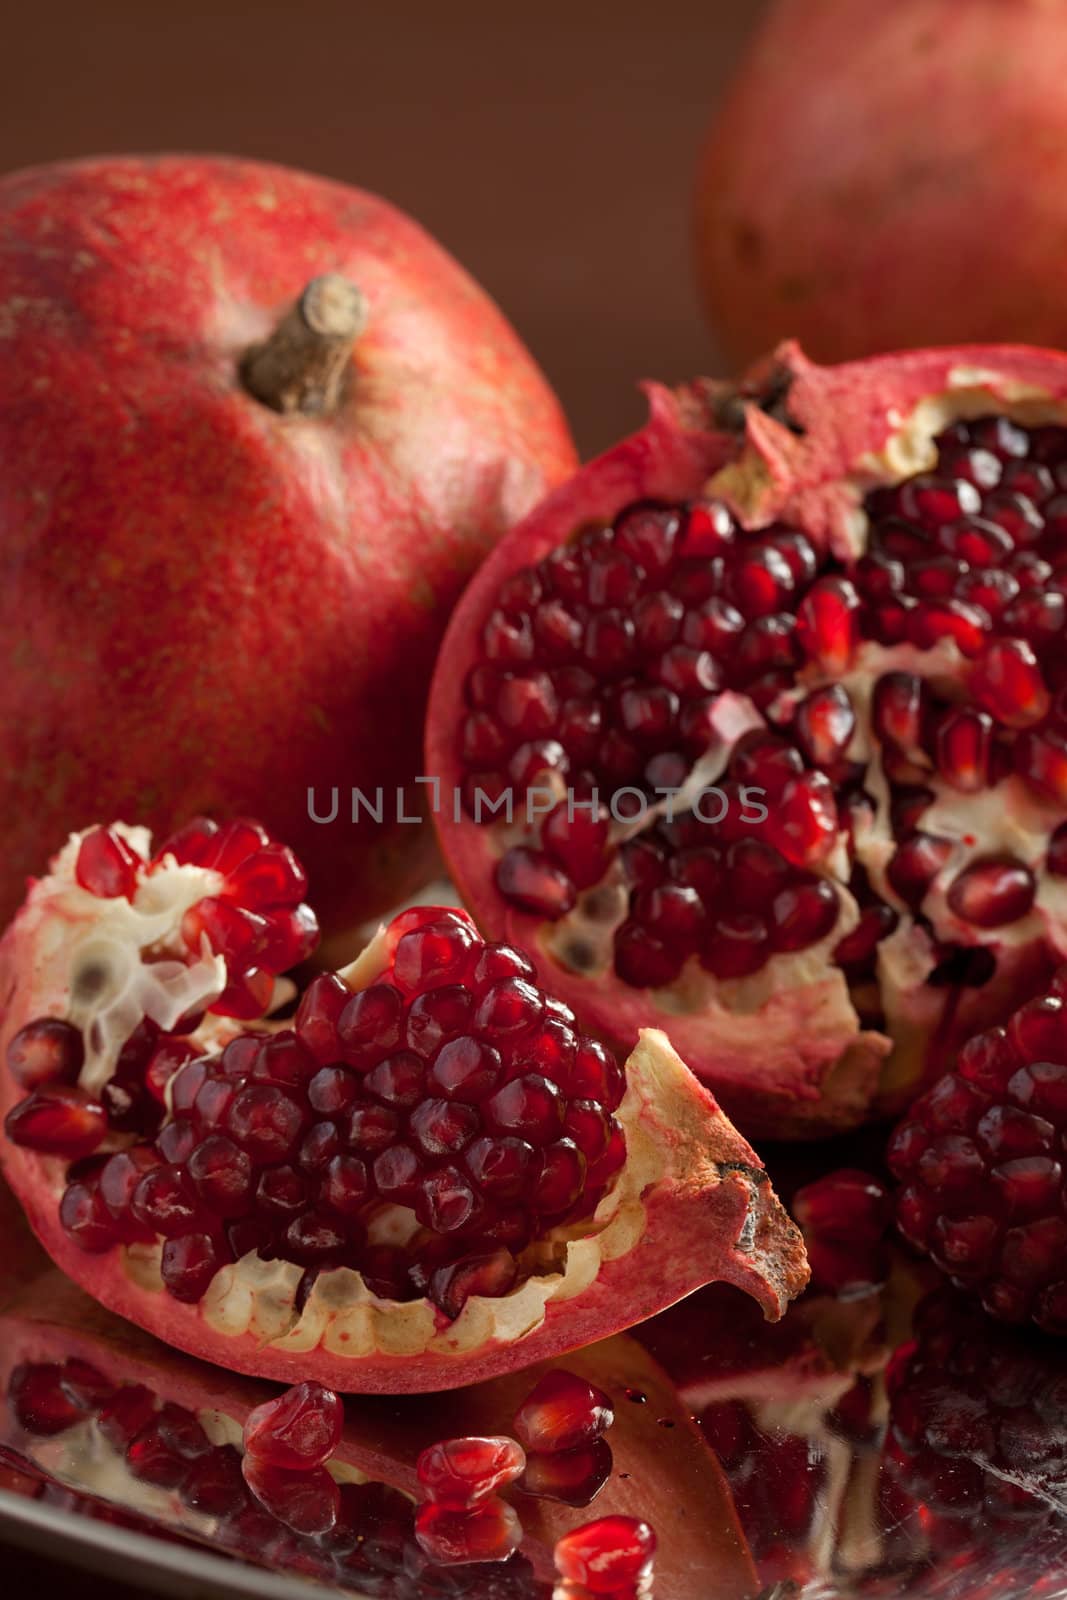 Pomegranate slices and seeds on silver salver